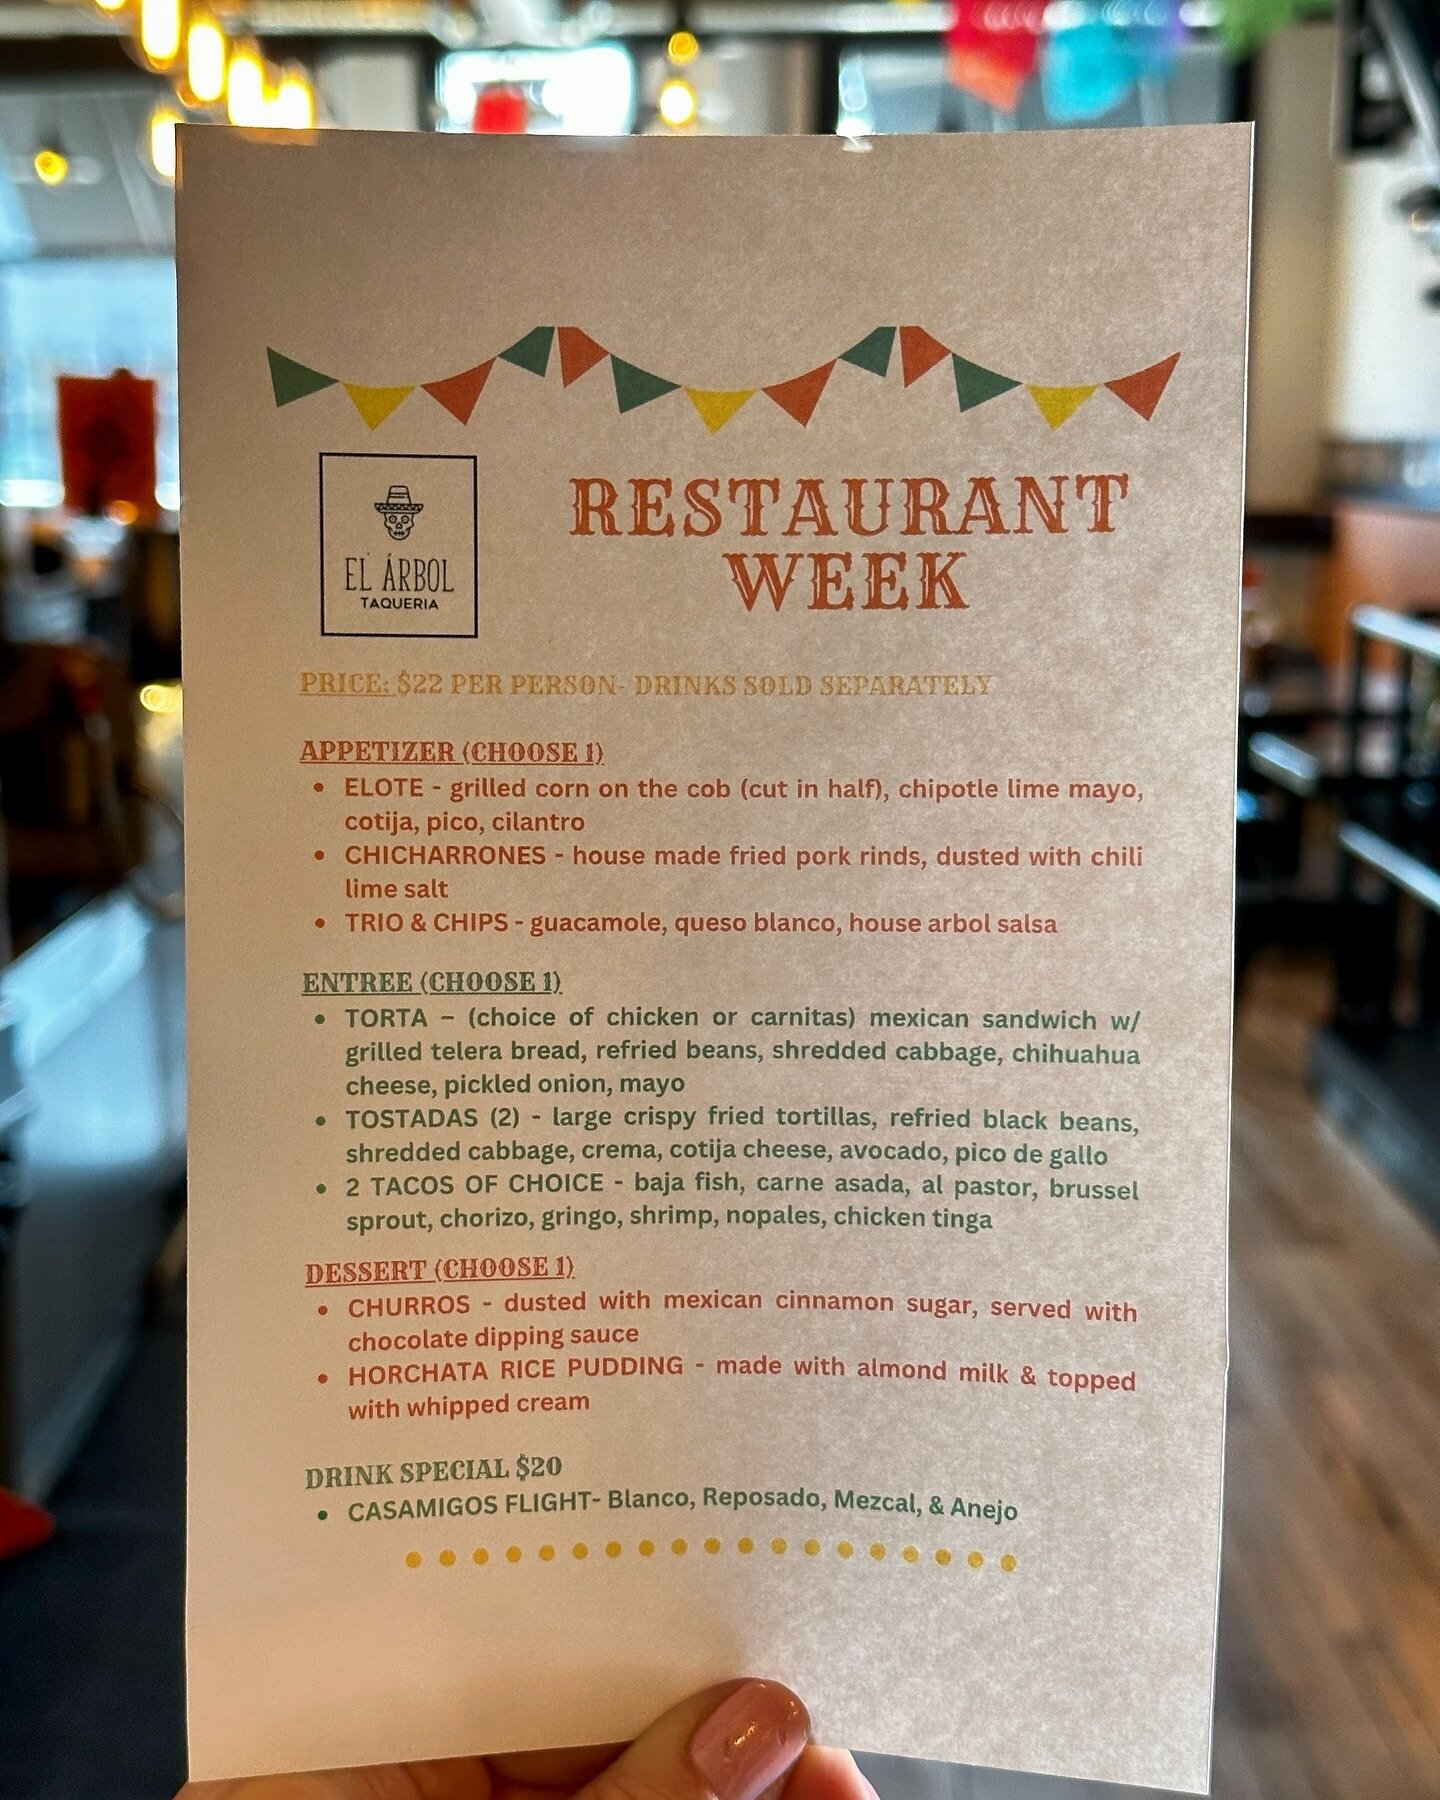 RESTAURANT WEEK in Brighton is happening this week! Come check out our specials. We have featured a retired menu item 💃🏼💃🏼💃🏼